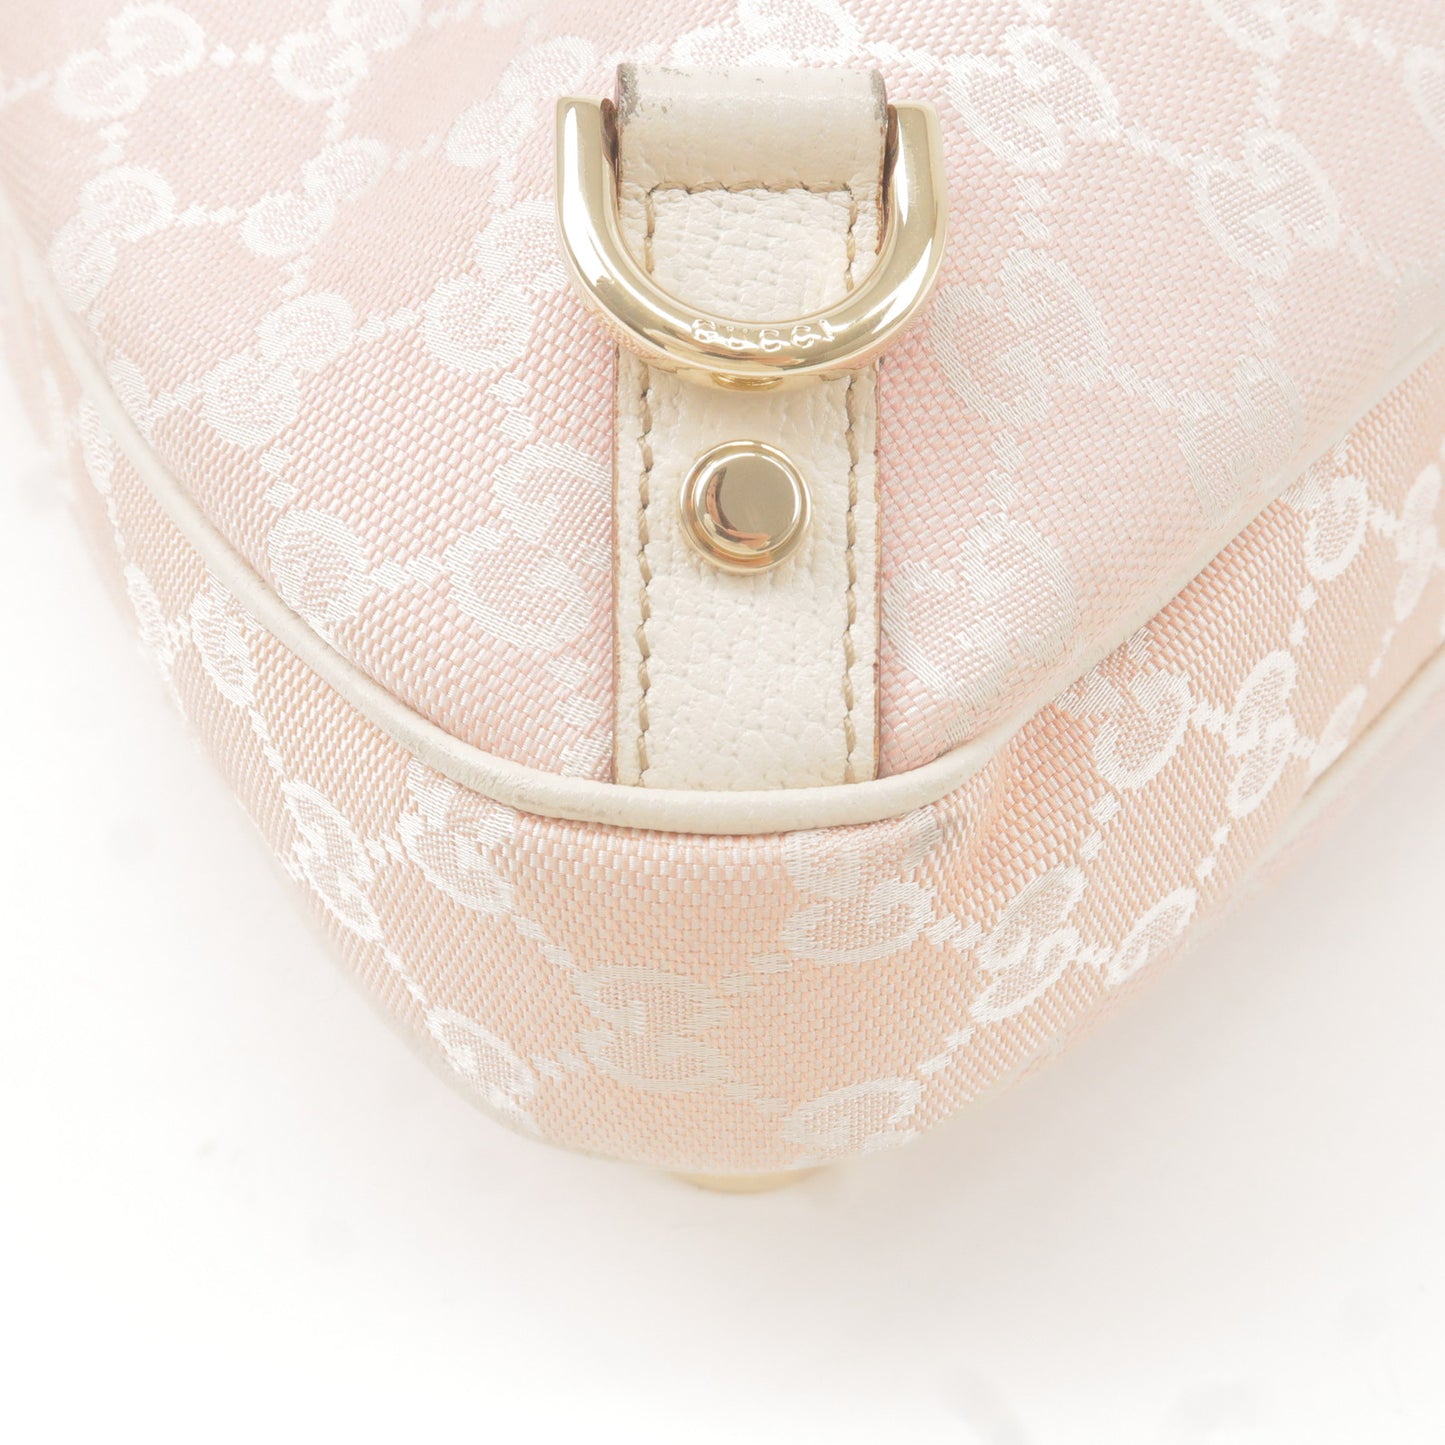 GUCCI Abbey GG Canvas Leather Shoulder Bag Pink White 130737